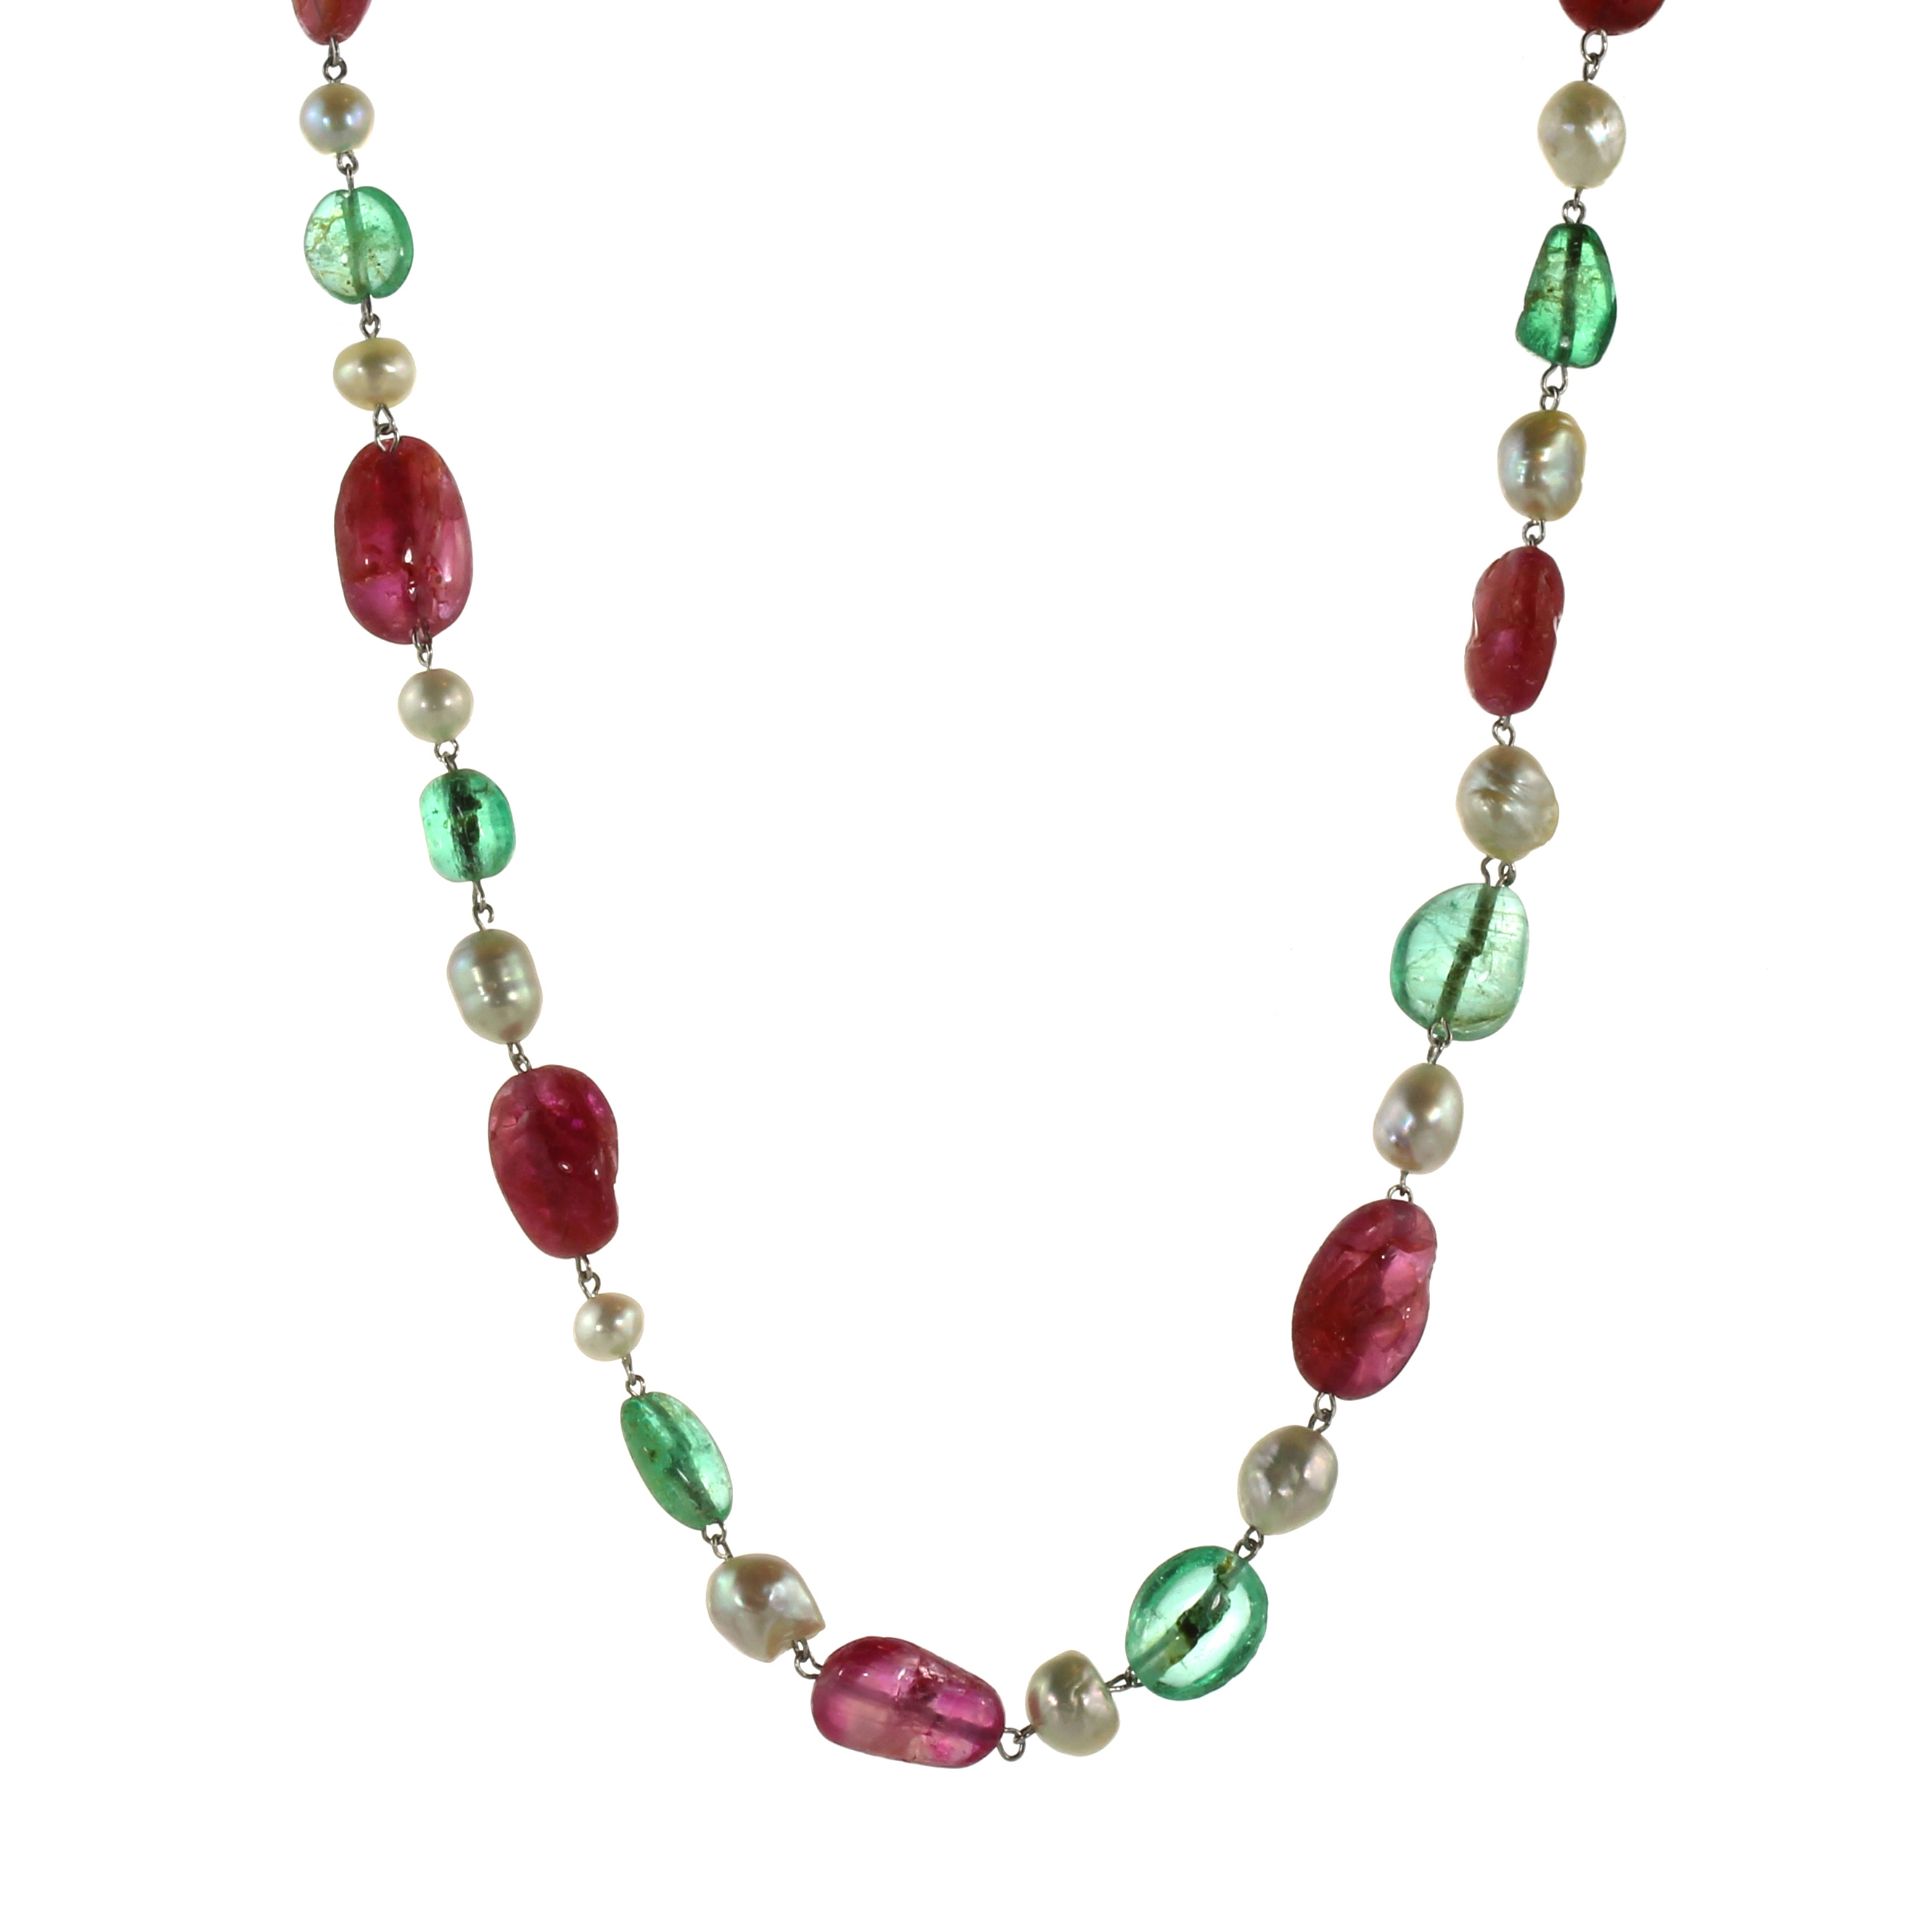 A BURMA RUBY, COLOMBIAN EMERALD AND NATURAL SALTWATER PEARL NECKLACE in white gold or platinum